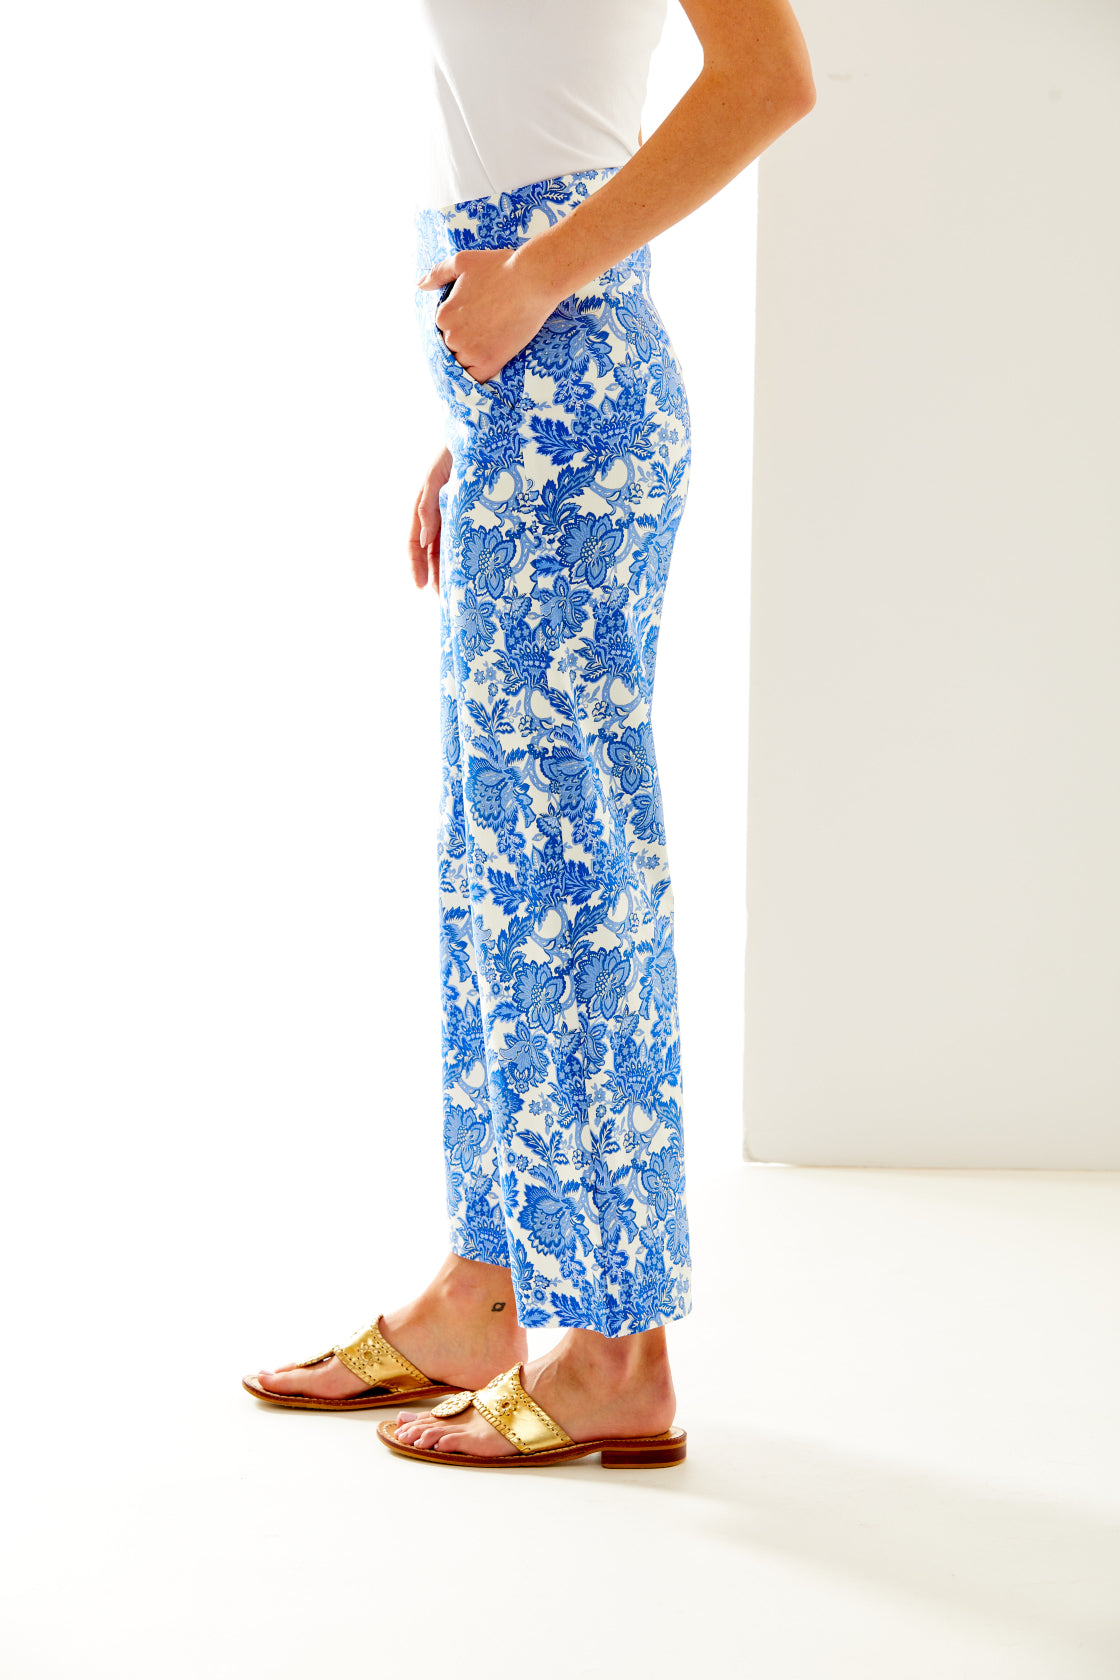 Woman in blue and white printed pant